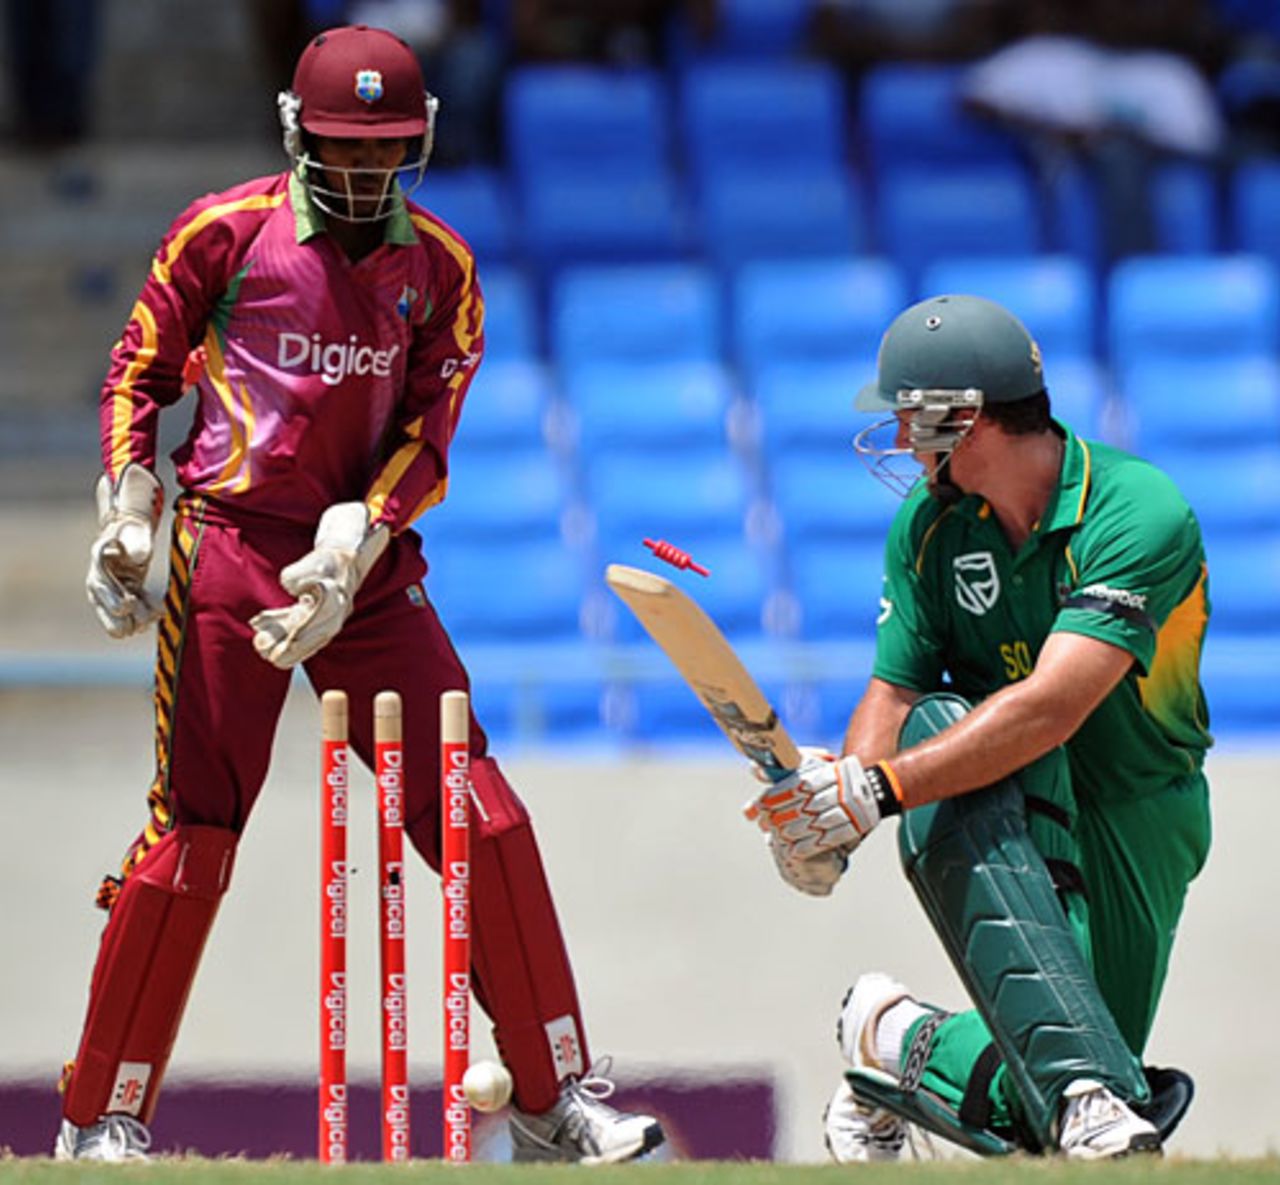 Having looked in decent touch Graeme Smith was bowled attempting to sweep Nikita Miller, West Indies v South Africa, 2nd ODI, Antigua, May 24, 2010